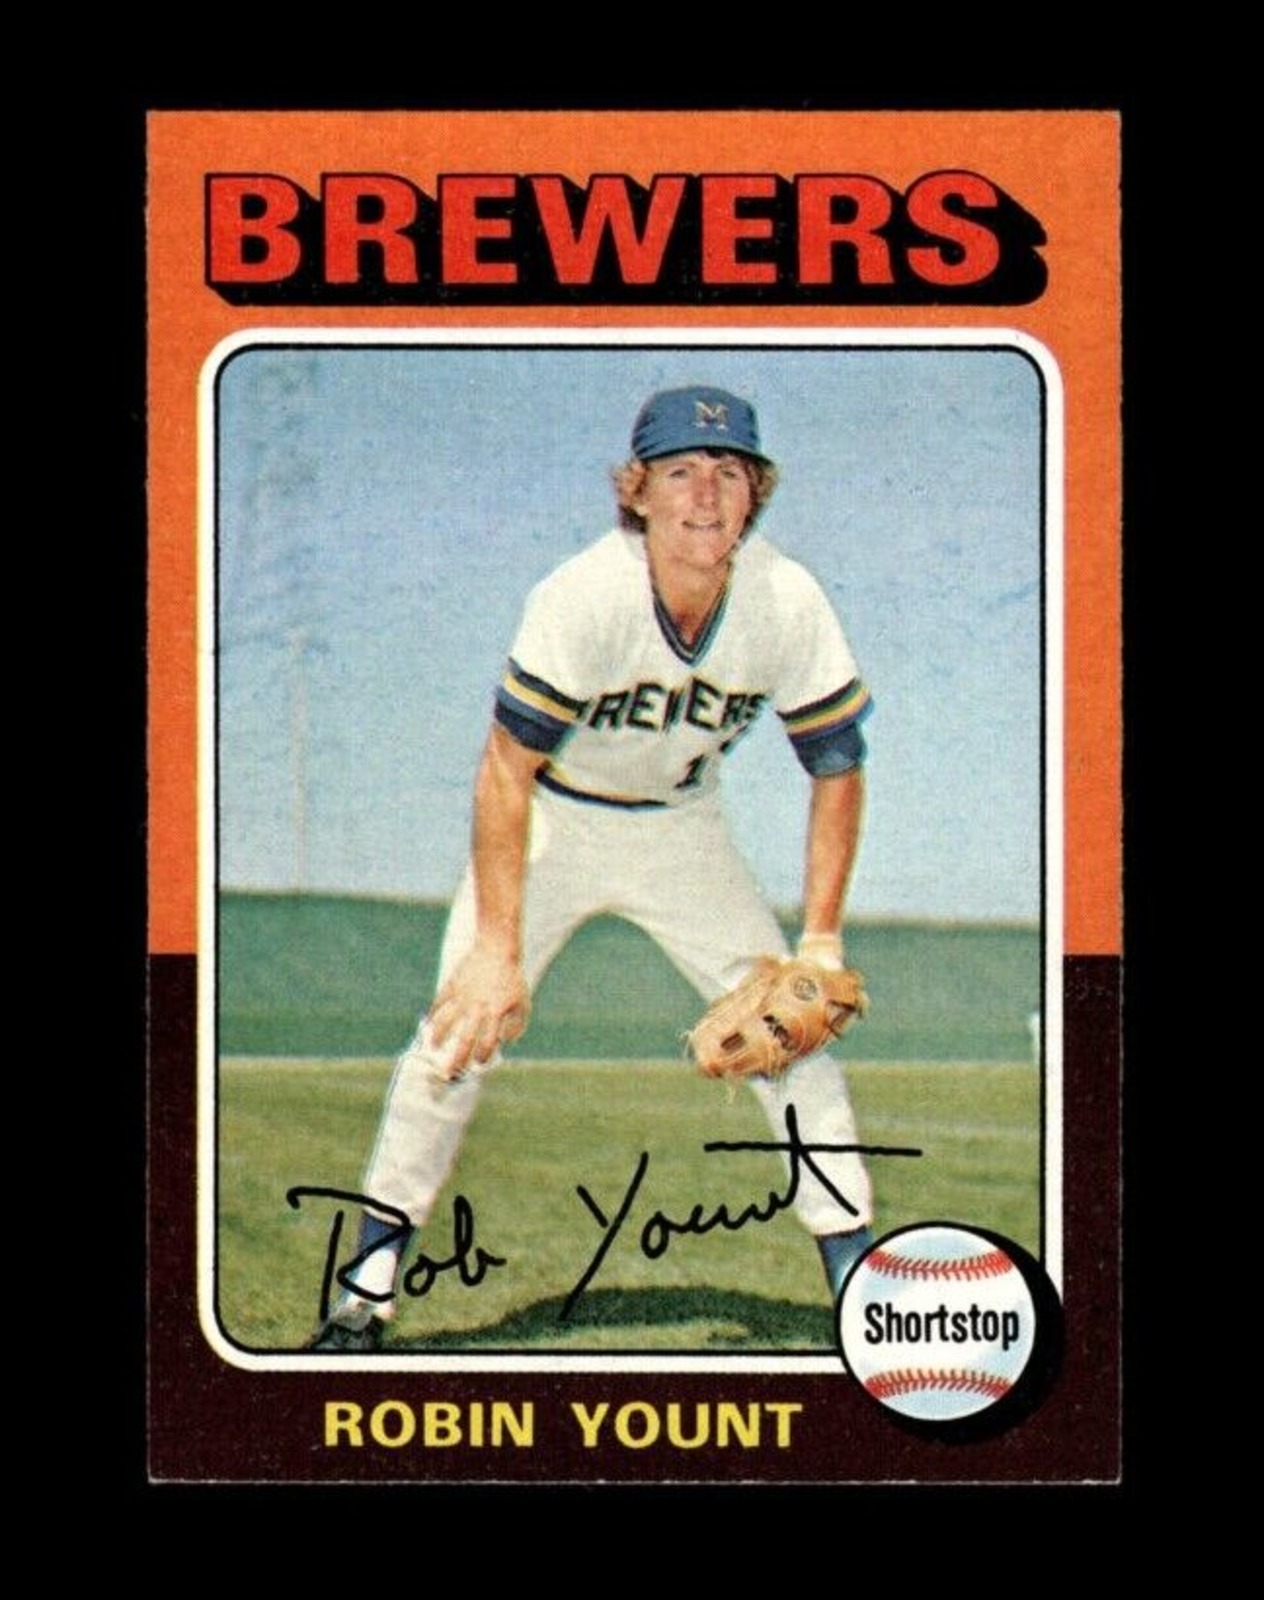 1975 Topps Robin Yount rookie card